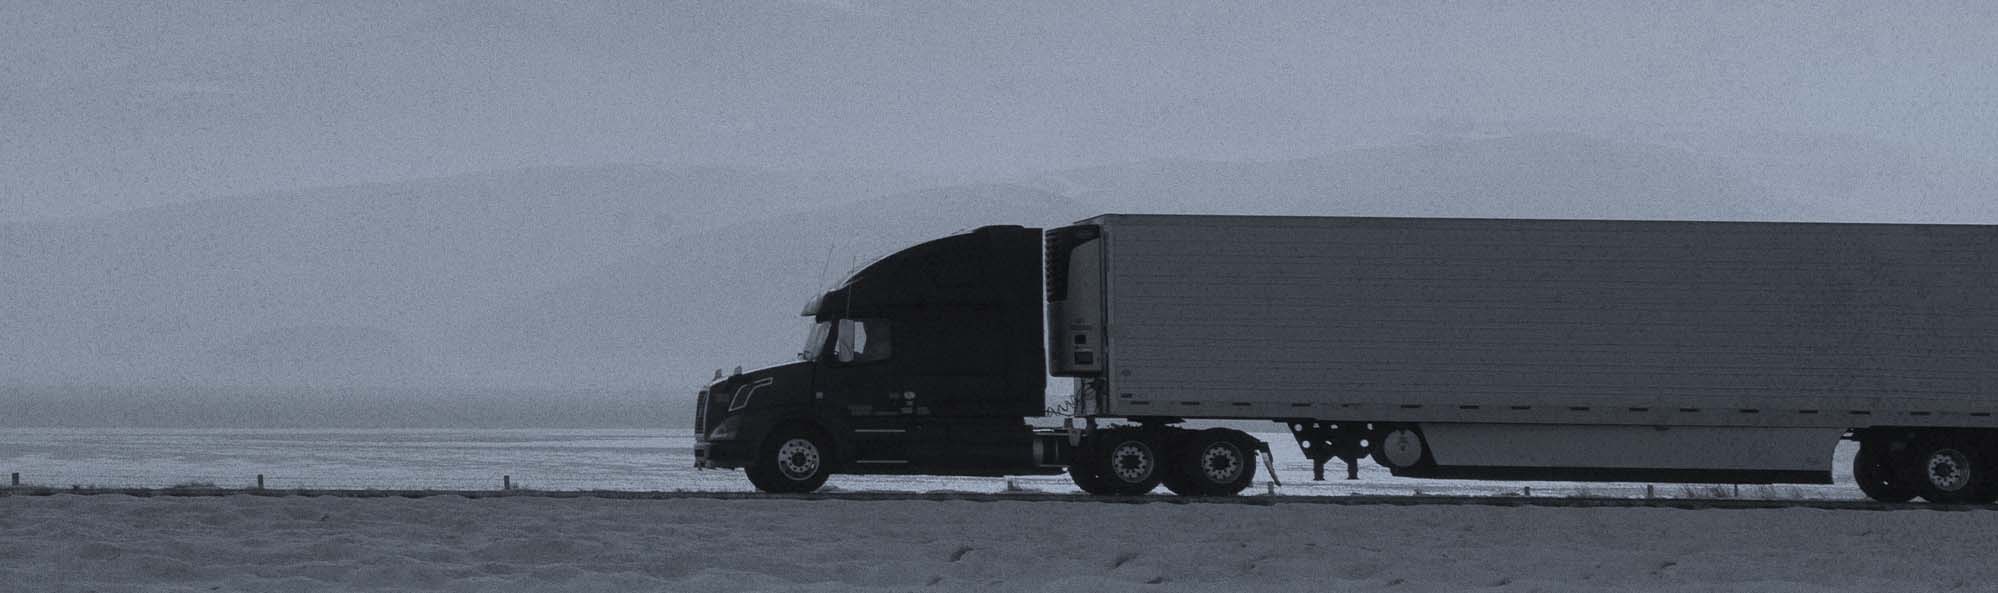 History of Freightliner